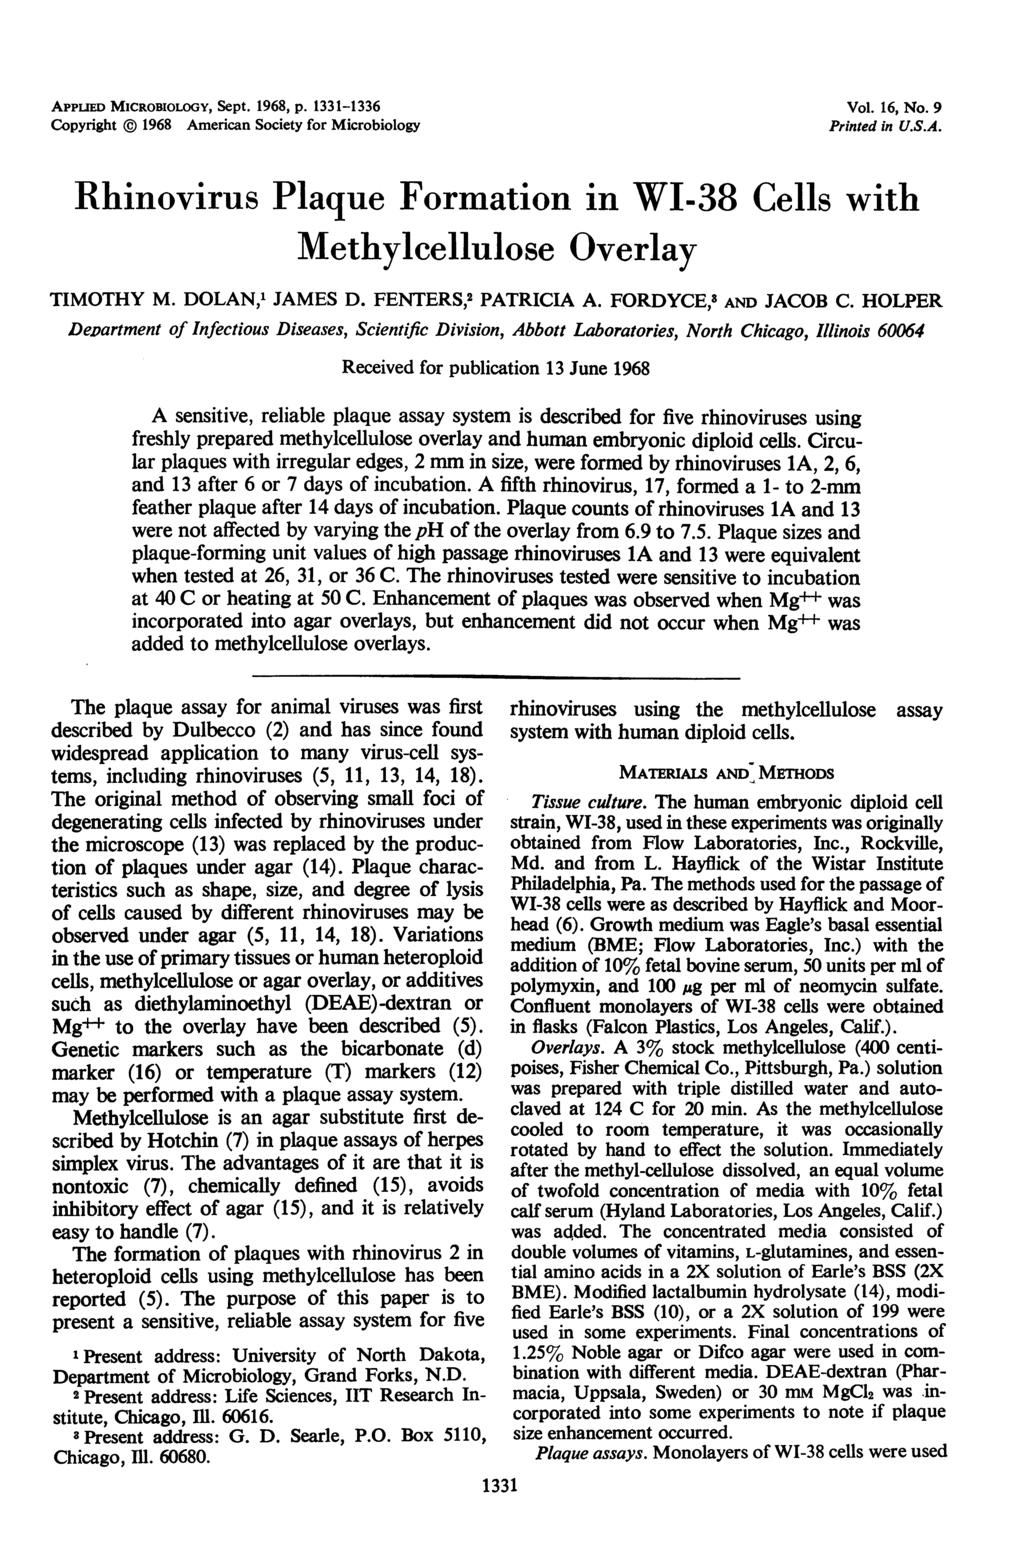 APPLIE MICRoBIoLoGY, Sept. 1968, p. 1331-1336 Copyright @ 1968 American Society for Microbiology Vol. 16, No. 9 Printed in U.S.A. Rhinovirus Plaque Formation in WI-38 Cells with Methylcellulose Overlay TIMOTHY M.